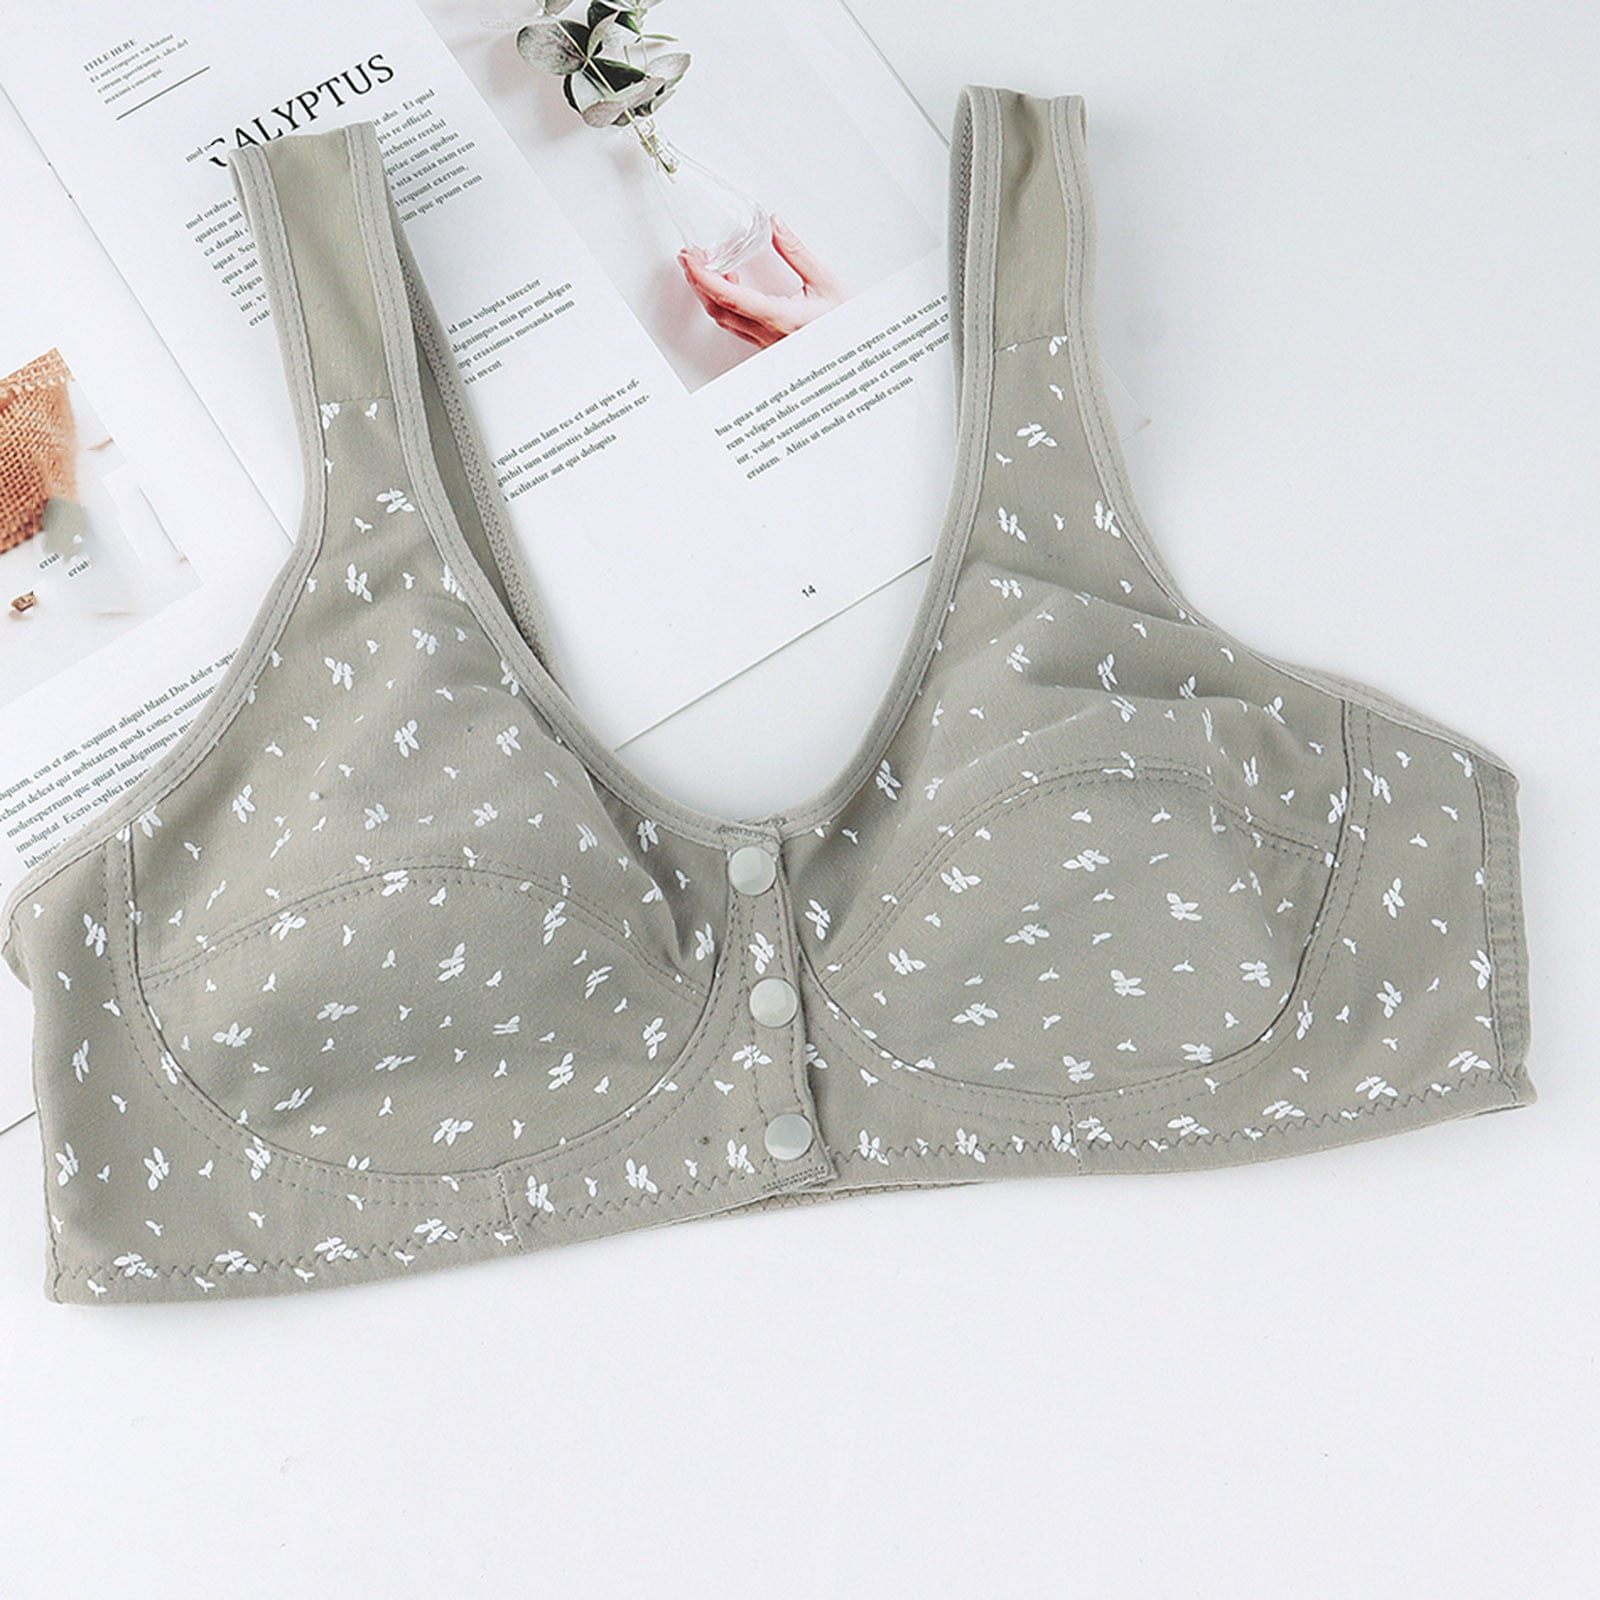 Pack of 2 Bras with Daisy Prints, for Girls - marl grey, Girls